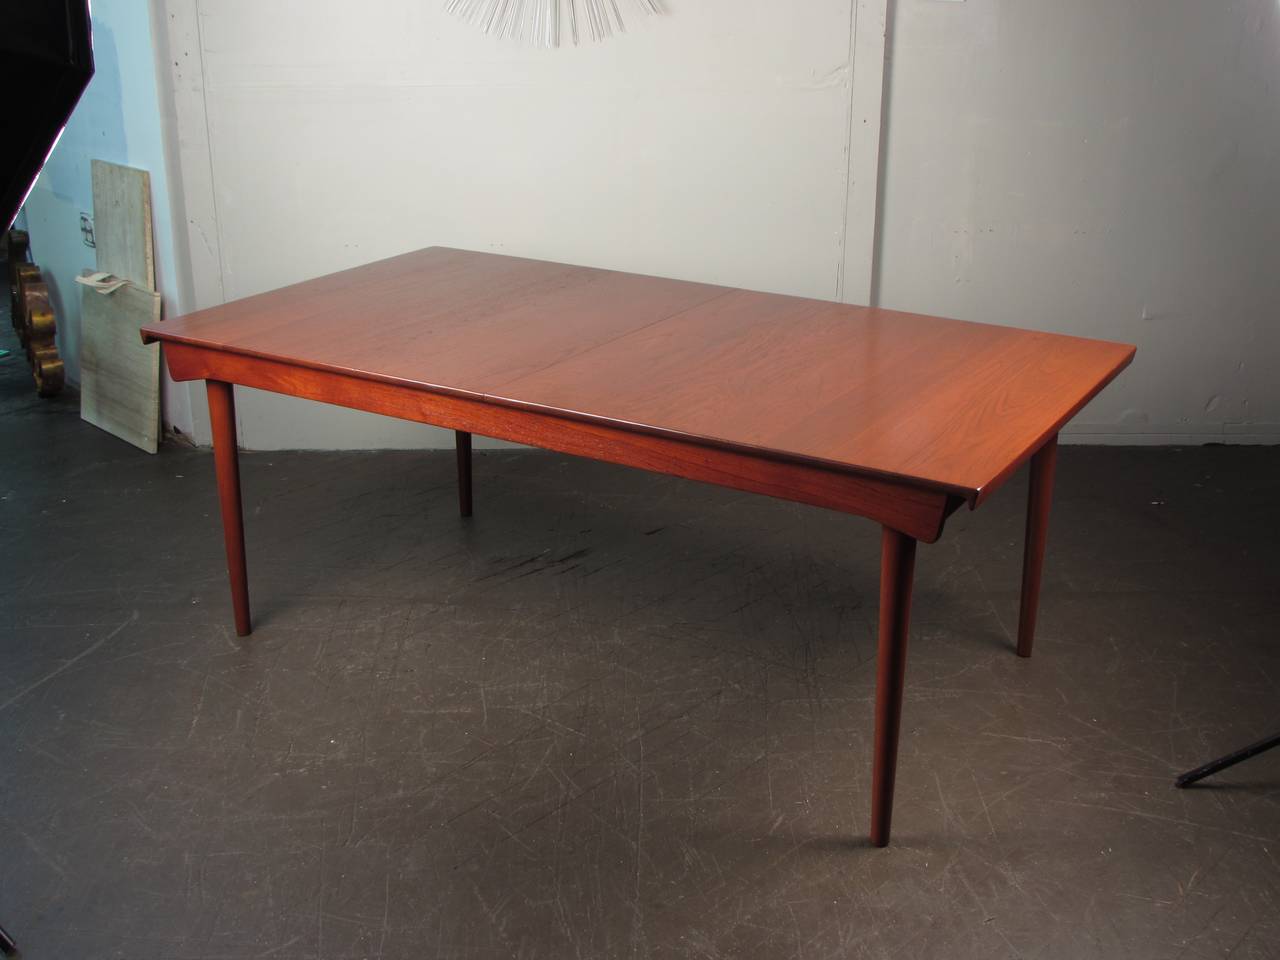 Stunning extendable teak dining table by Finn Juhl, France & Sons model 540. An incredible example of Danish modern furniture. This table has gorgeous wood grain and deep rich teak color. This piece has been fully restored. Two 20